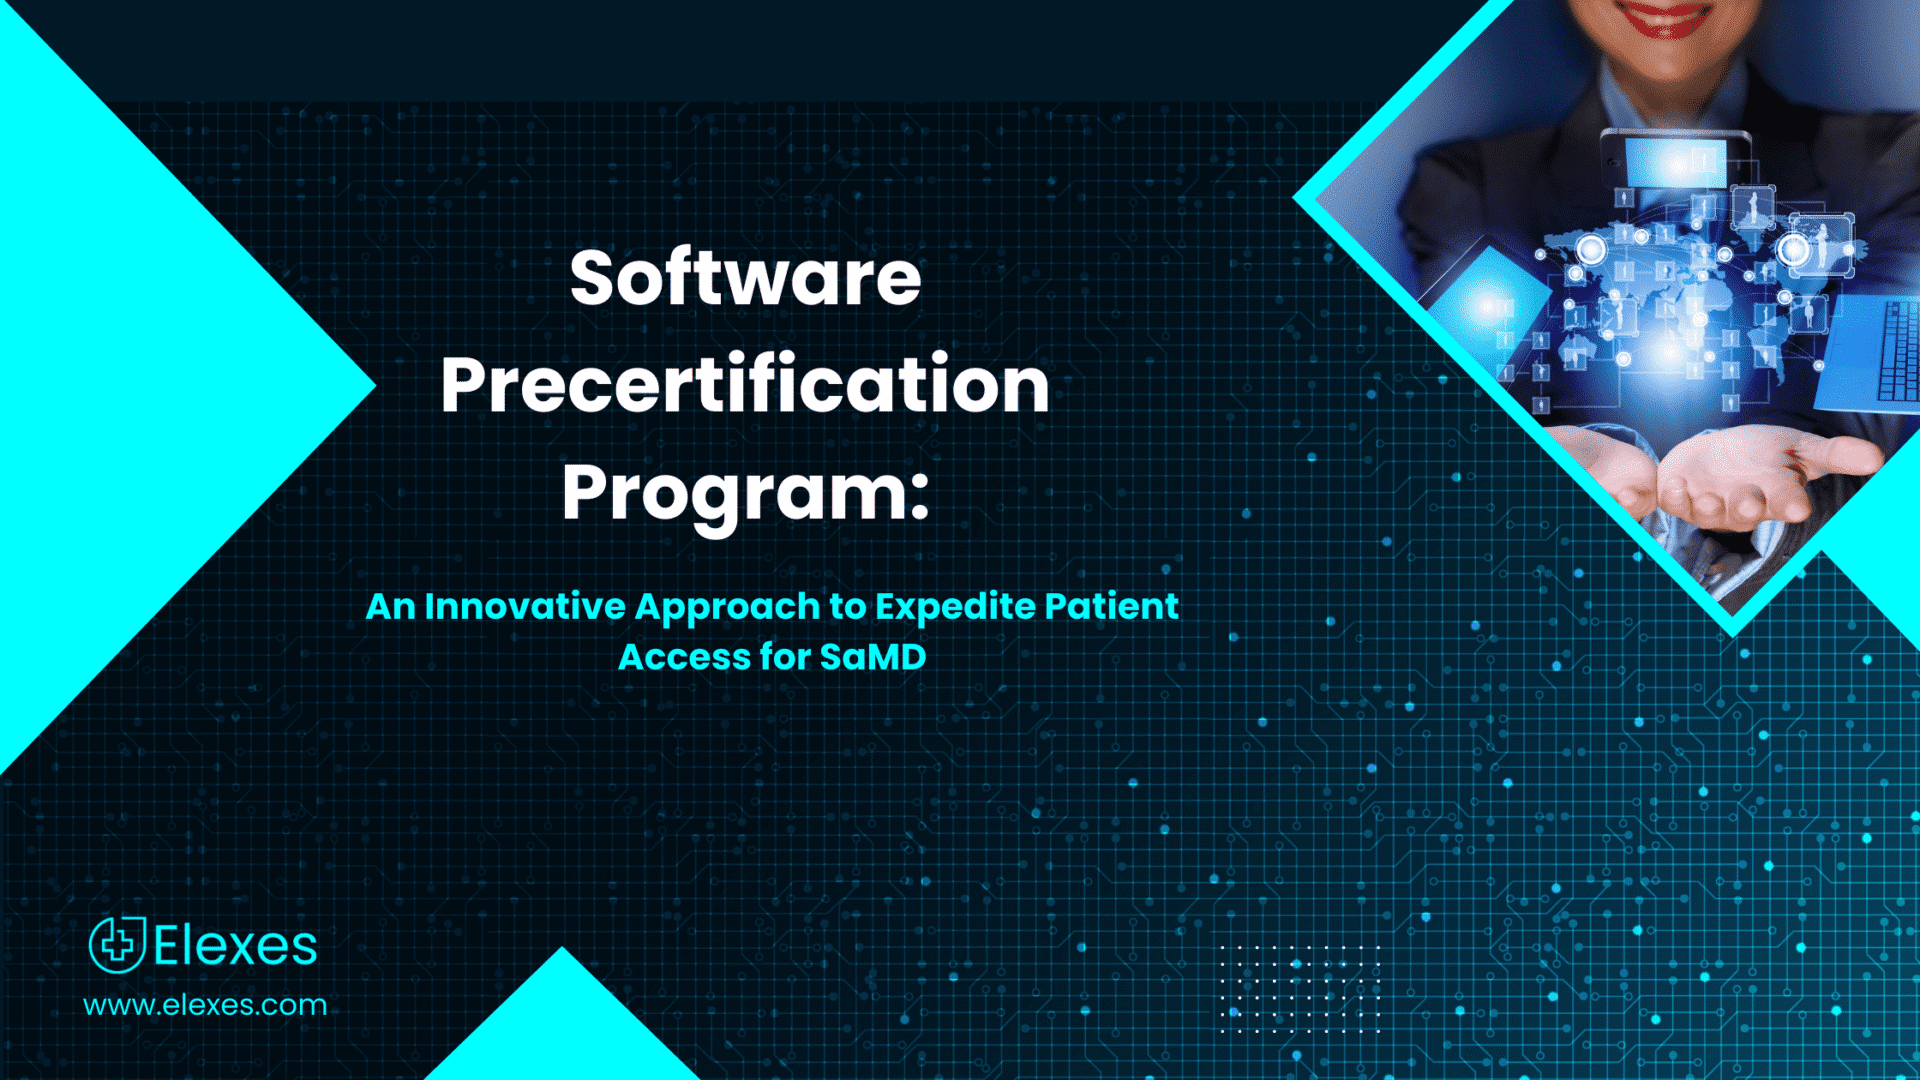 Software Precertification Program: An Innovative Approach to Expedite Patient Access for SaMD